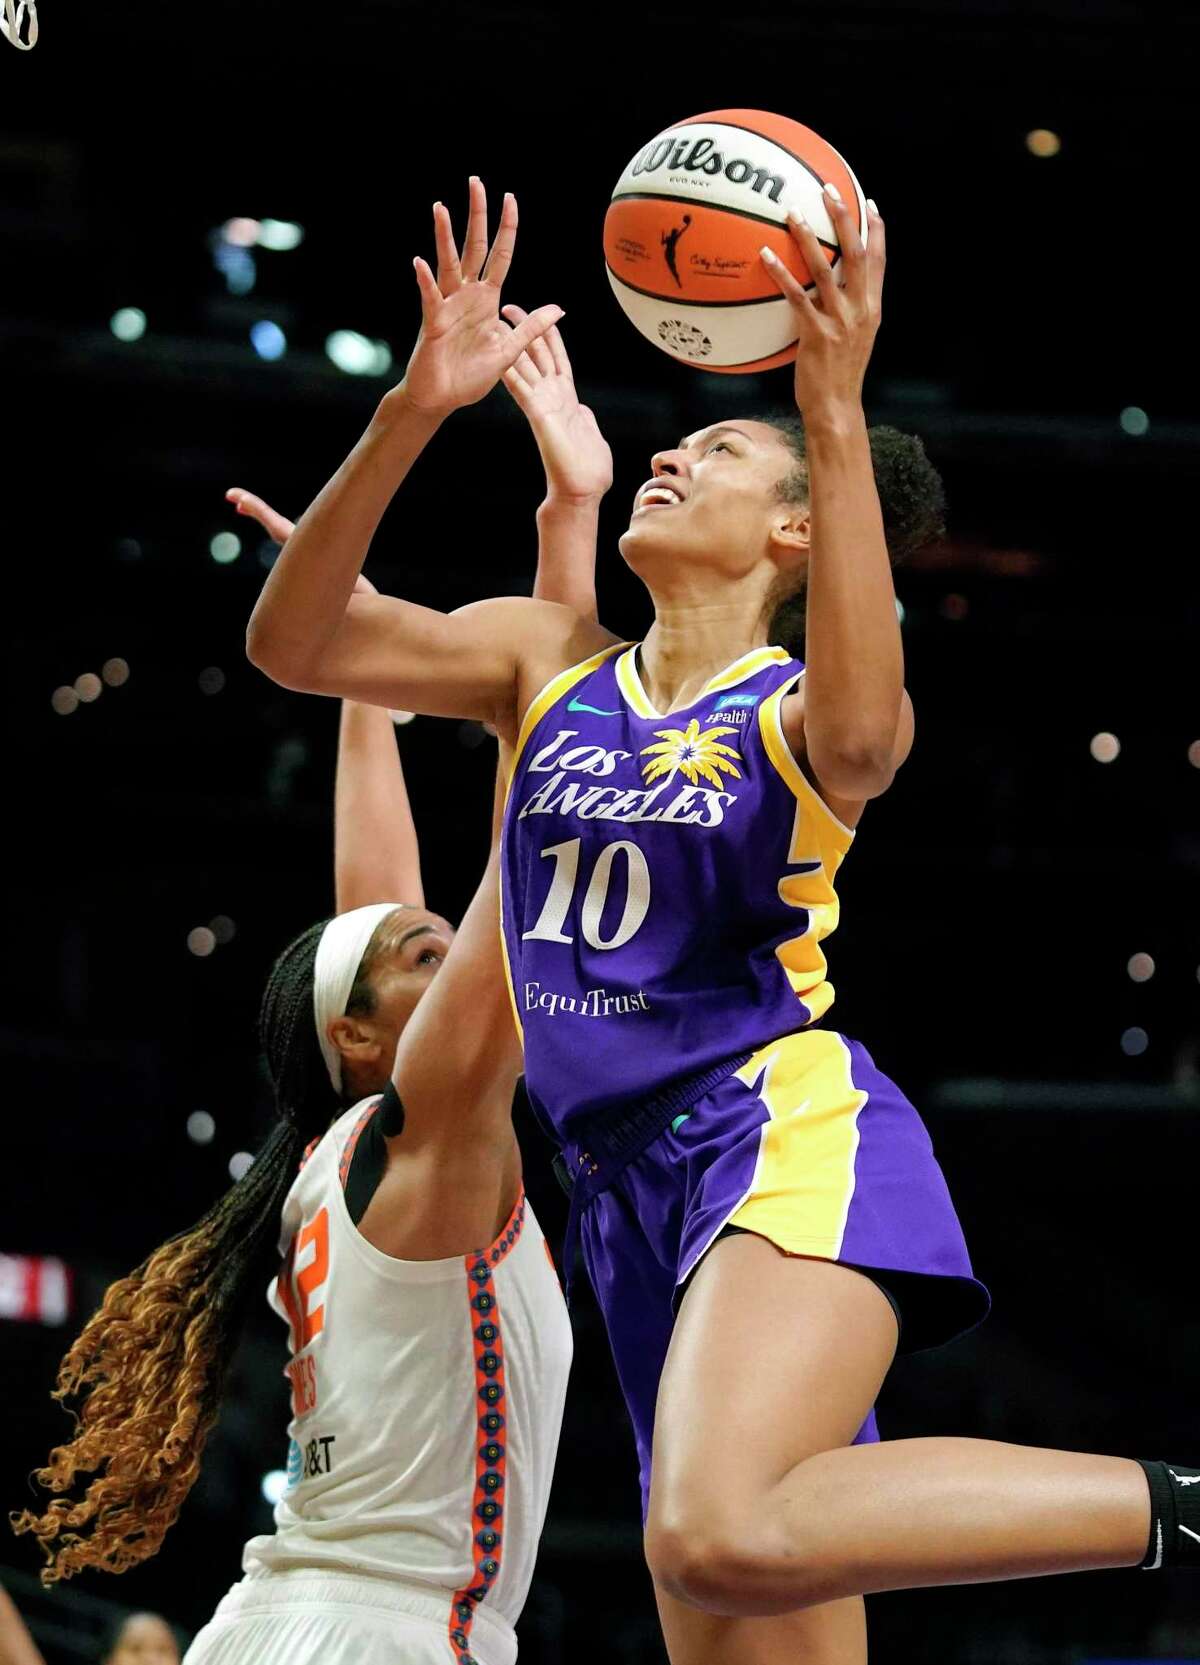 Los Angeles Sparks forward Olivia Nelson-Ododa, right, shoots as Connecticut Sun center Brionna Jones defends on Aug. 11. Nelson-Ododa credits UConn for helping her adjust to the pros: “I think that was a key piece in my player development, going through college and just kind of experiencing that really hard-nosed, great program. And I think it’s been able to help me in my transition to WNBA.”